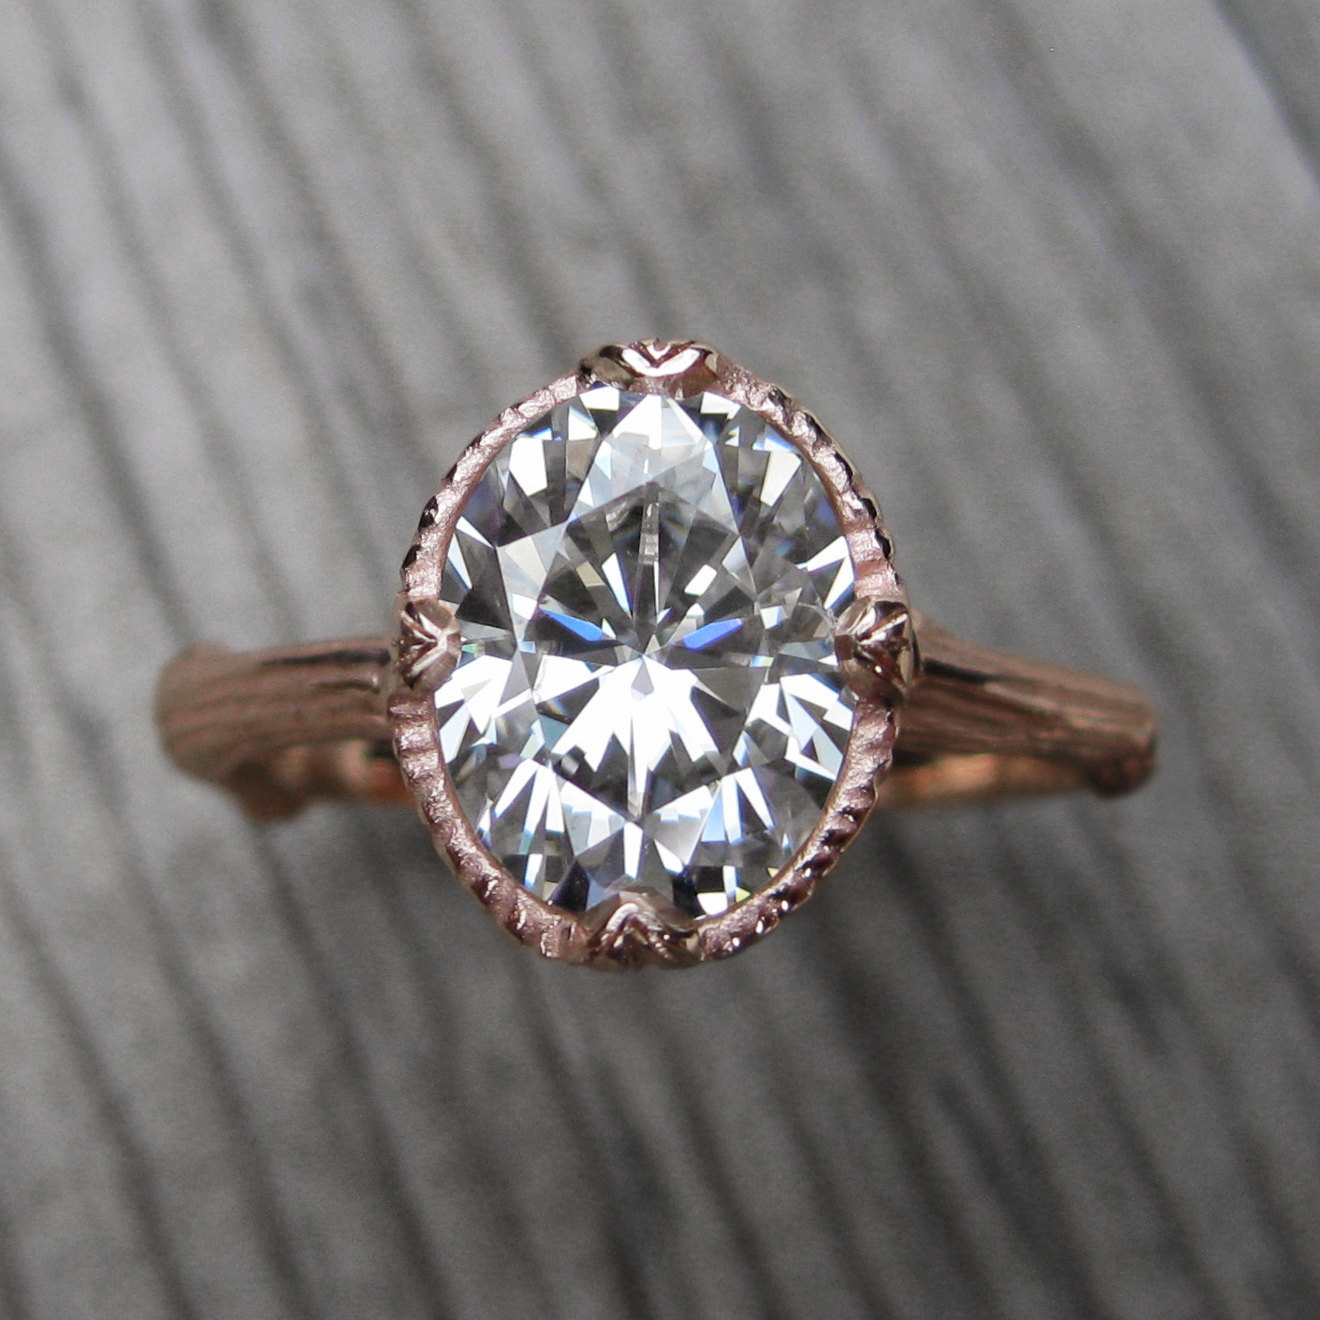 Unique Engagement Rings Etsy | by Kristin Coffin | http://emmalinebride.com/engagement/unique-engagement-rings-etsy/